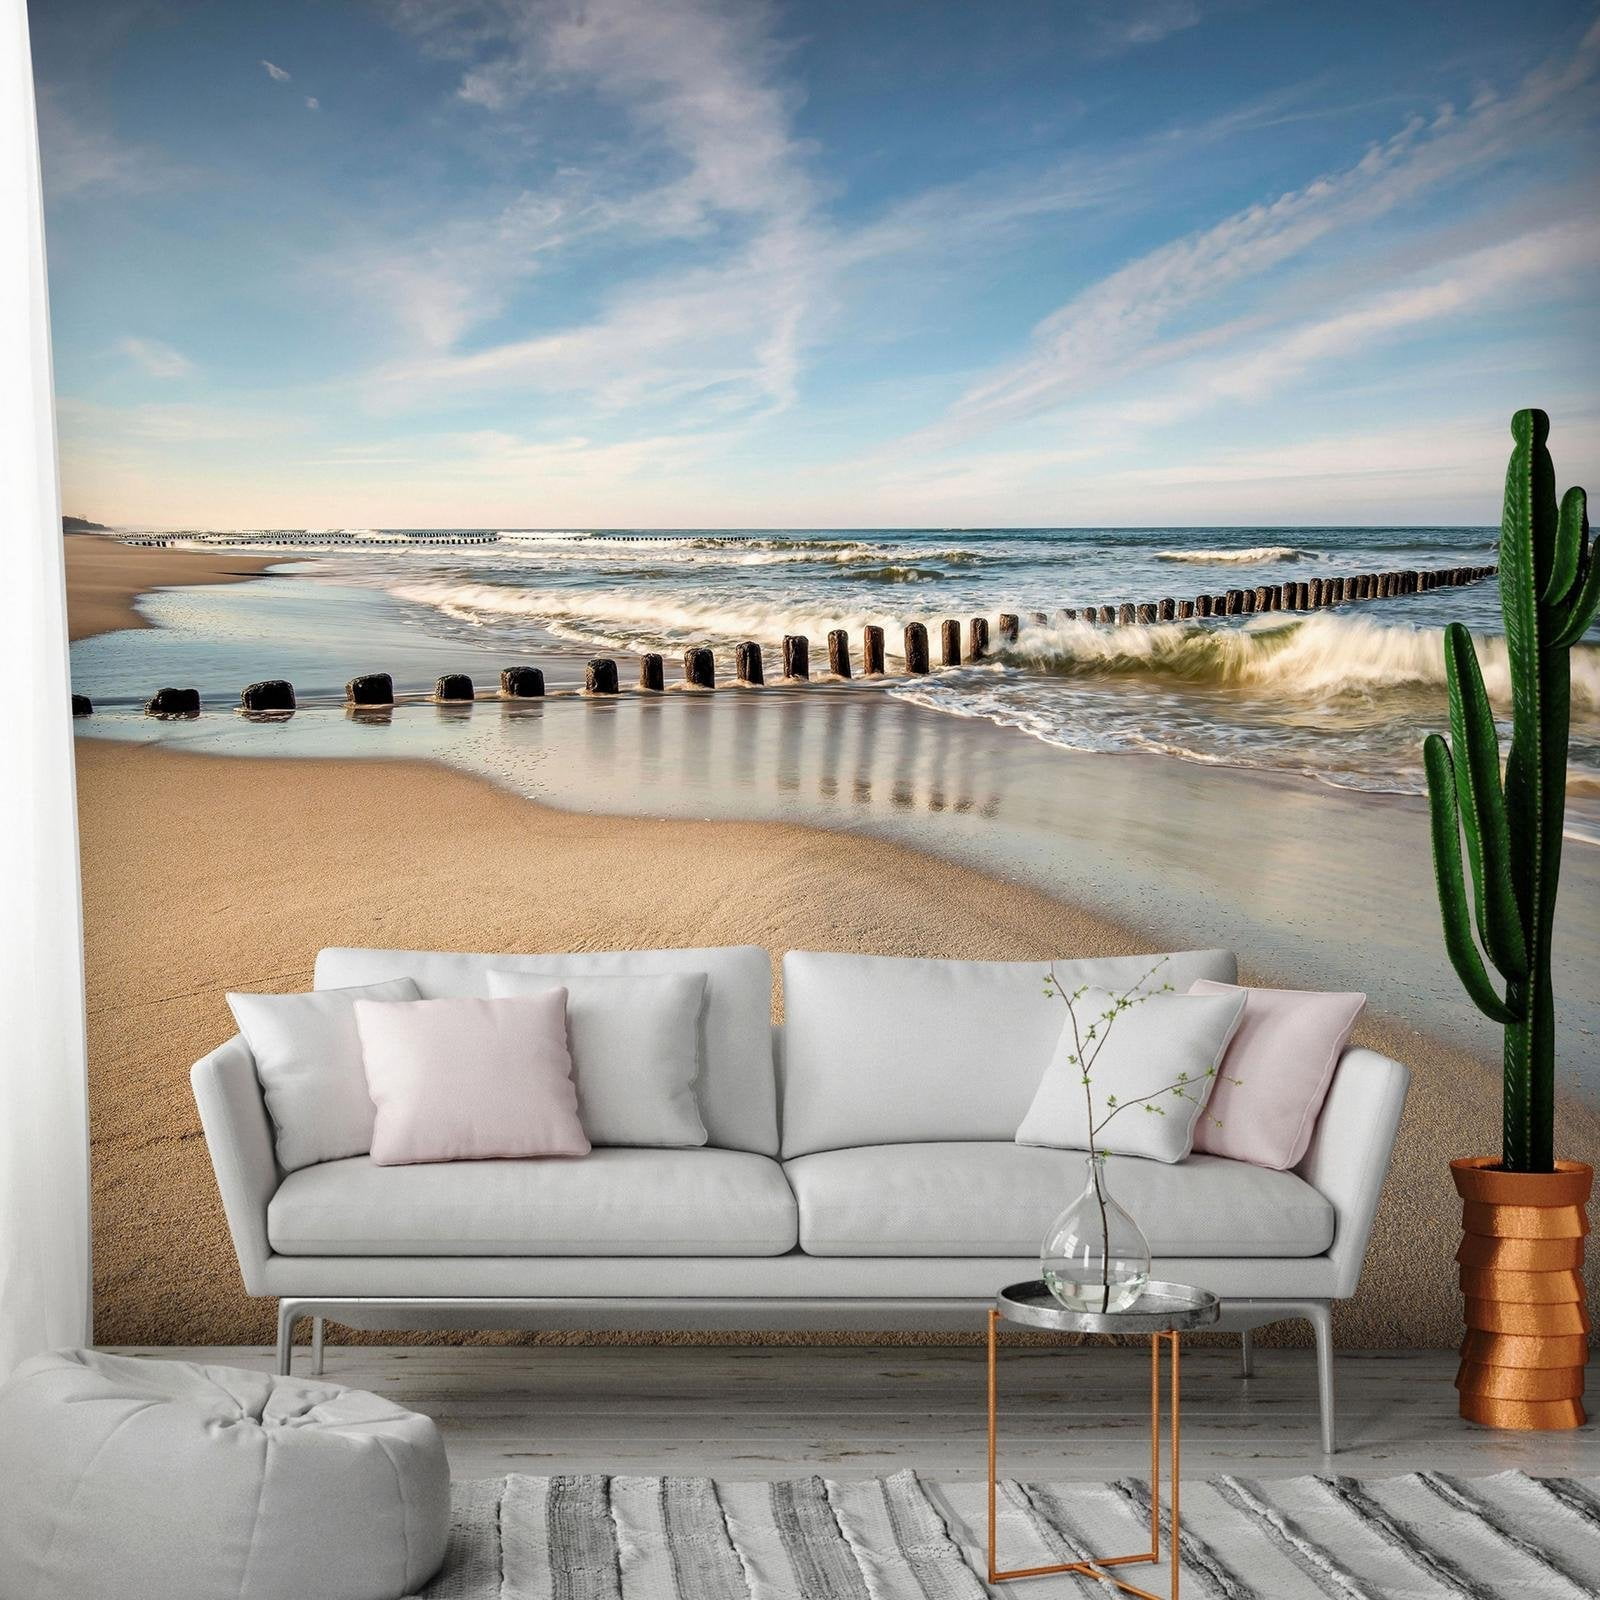 Tiptophomedecor - - Stick and Decals Peel Mural Wall Removable Beach Wallpaper Sea Breeze Wall